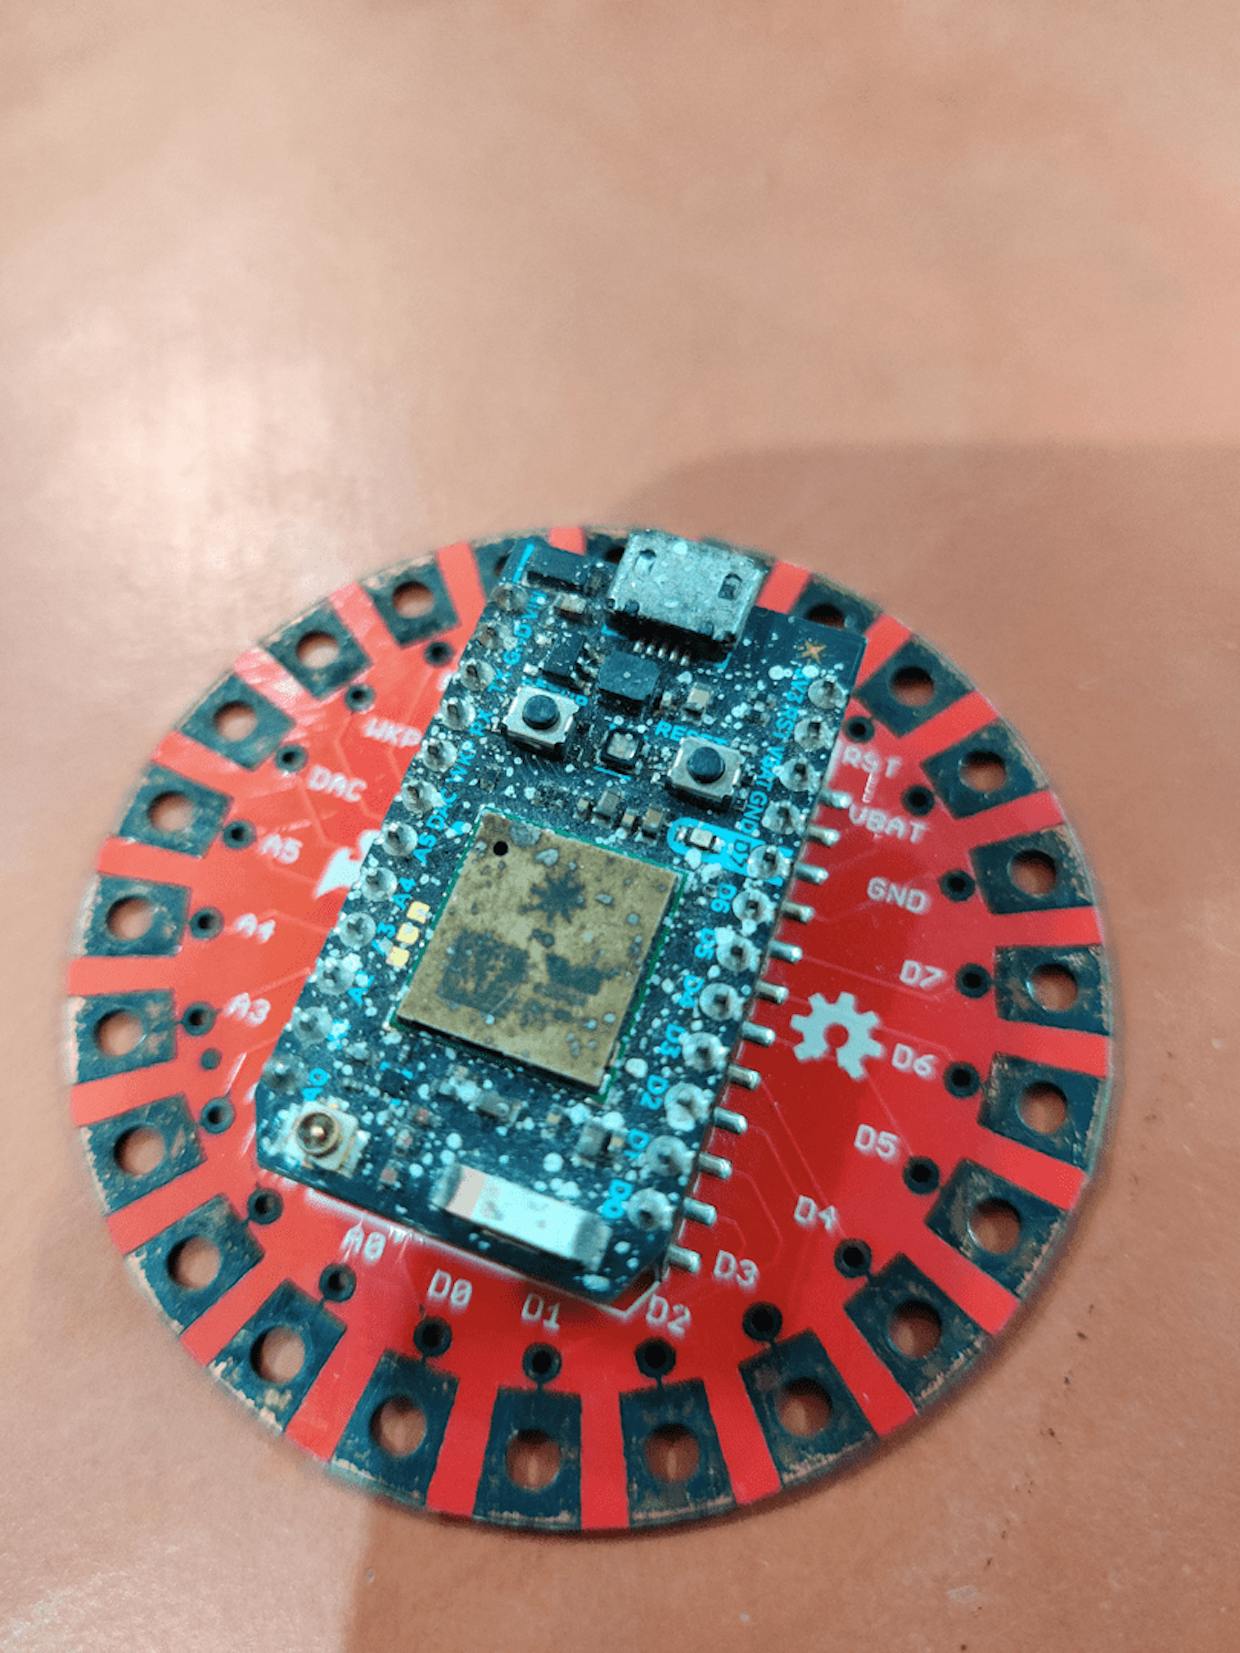 Some Sparkfun board which has seen much better days in it's youth